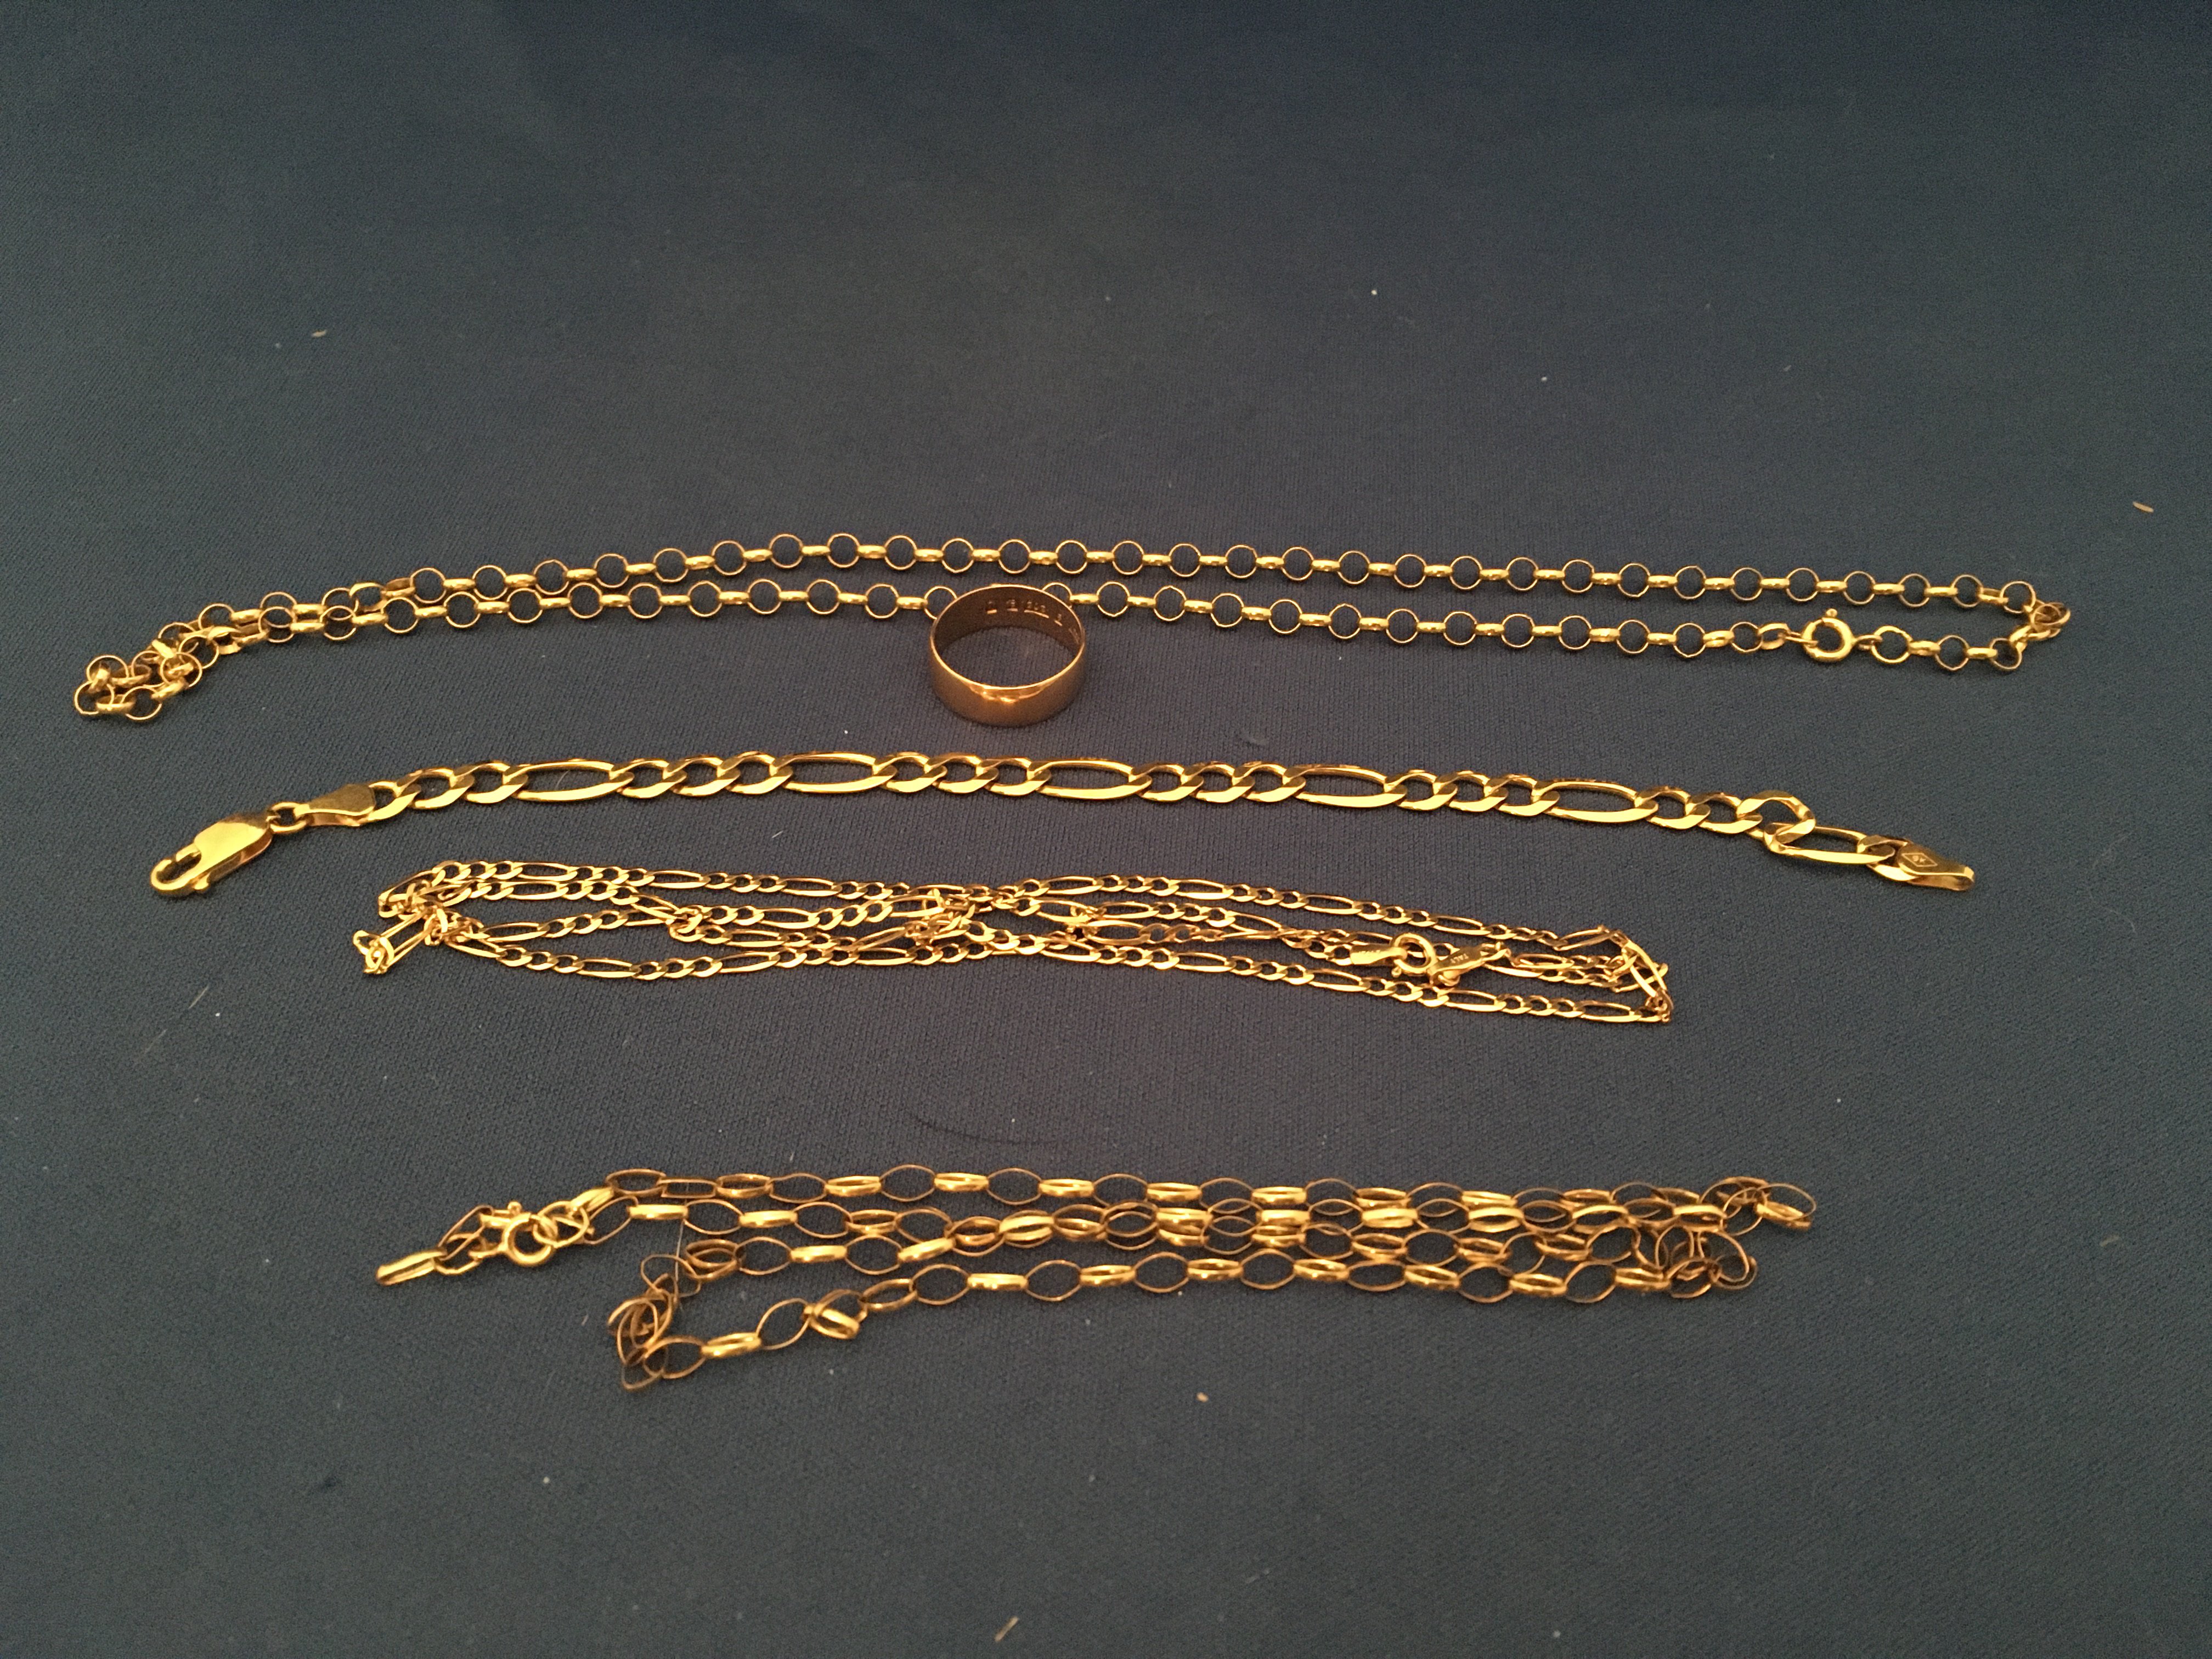 4 9ct gold chains and a 9ct gold wedding band. (Approx 23.9g)